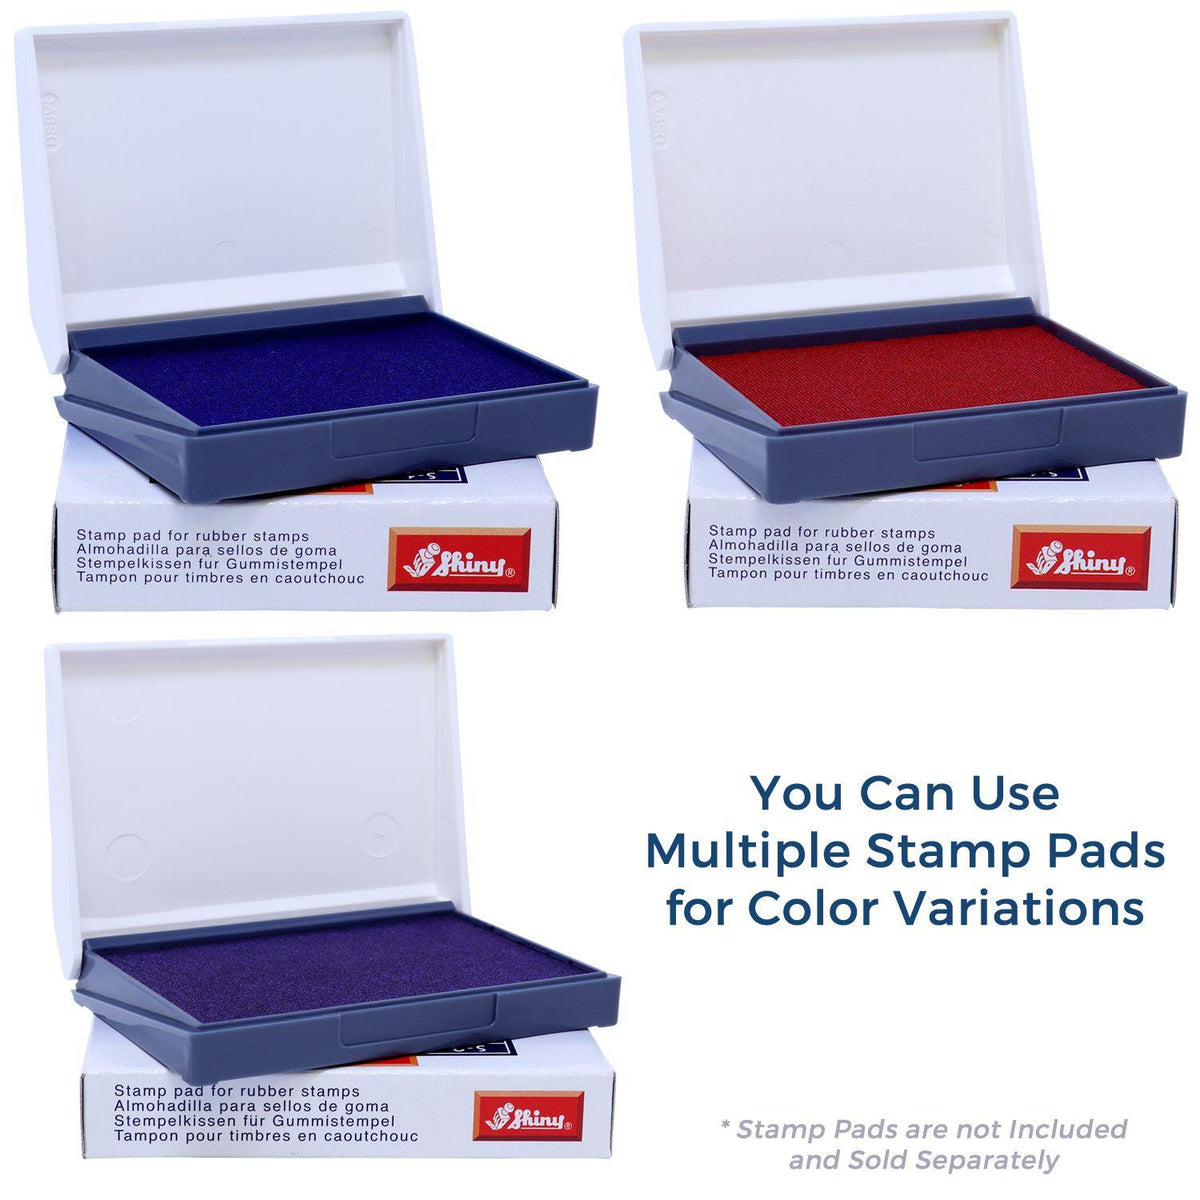 Stamp Pads for Large Covid-19 Test Pending Rubber Stamp Available